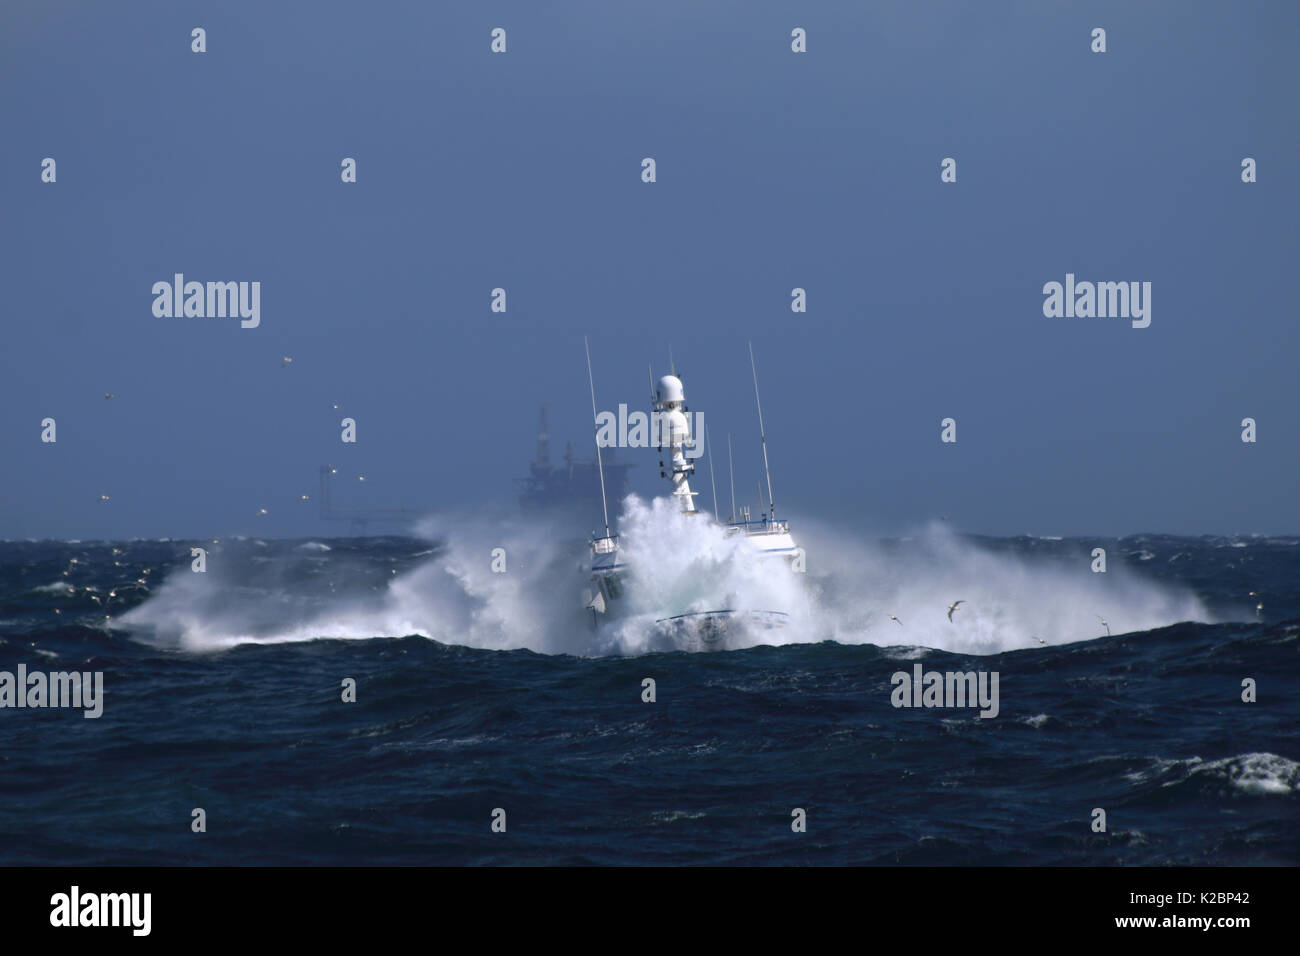 Fishing vessel 'Harvester' in rough seas, May 2015.  Property released. Stock Photo